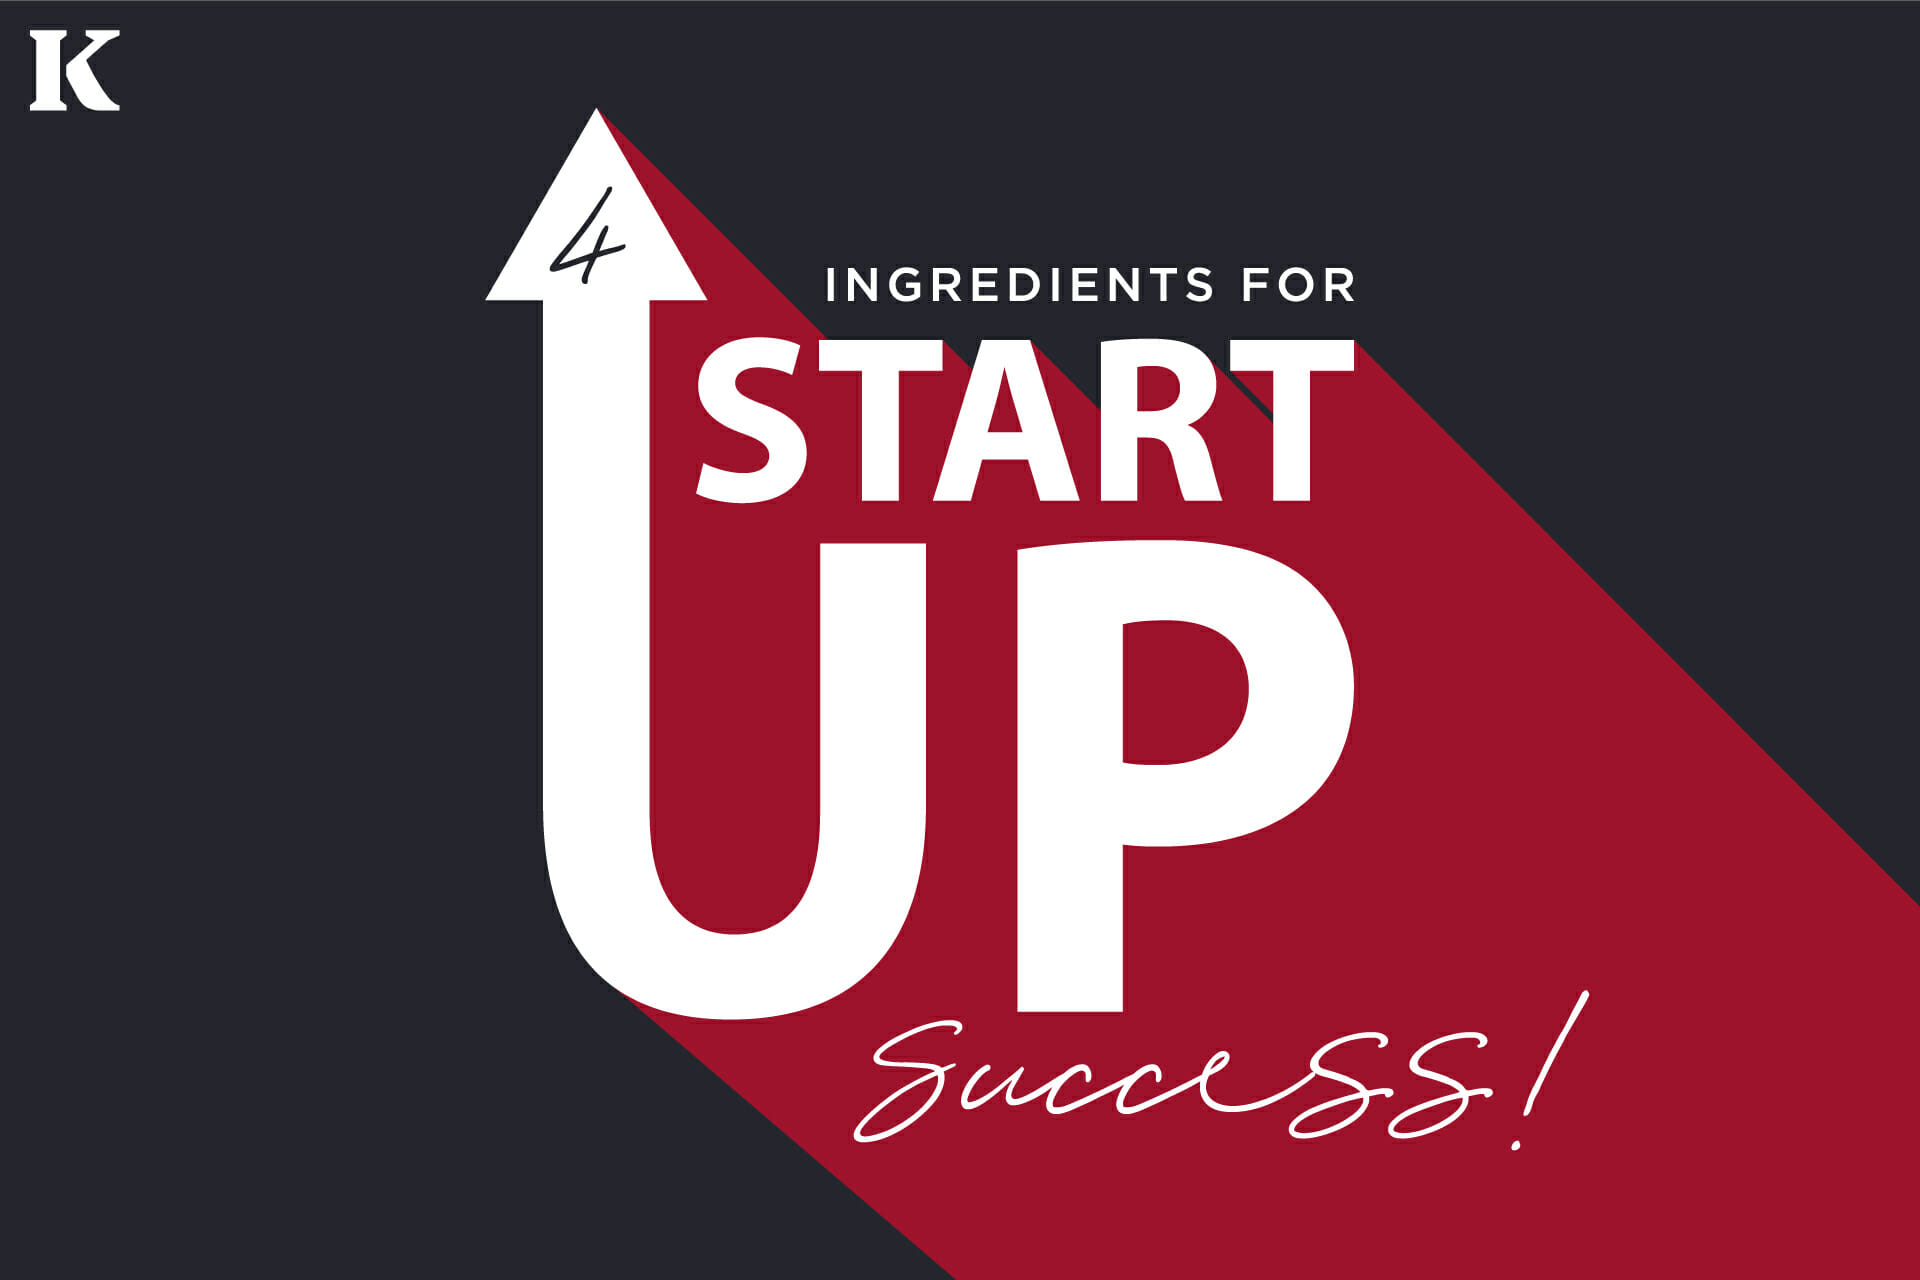 4 essential ingredients for start-up success